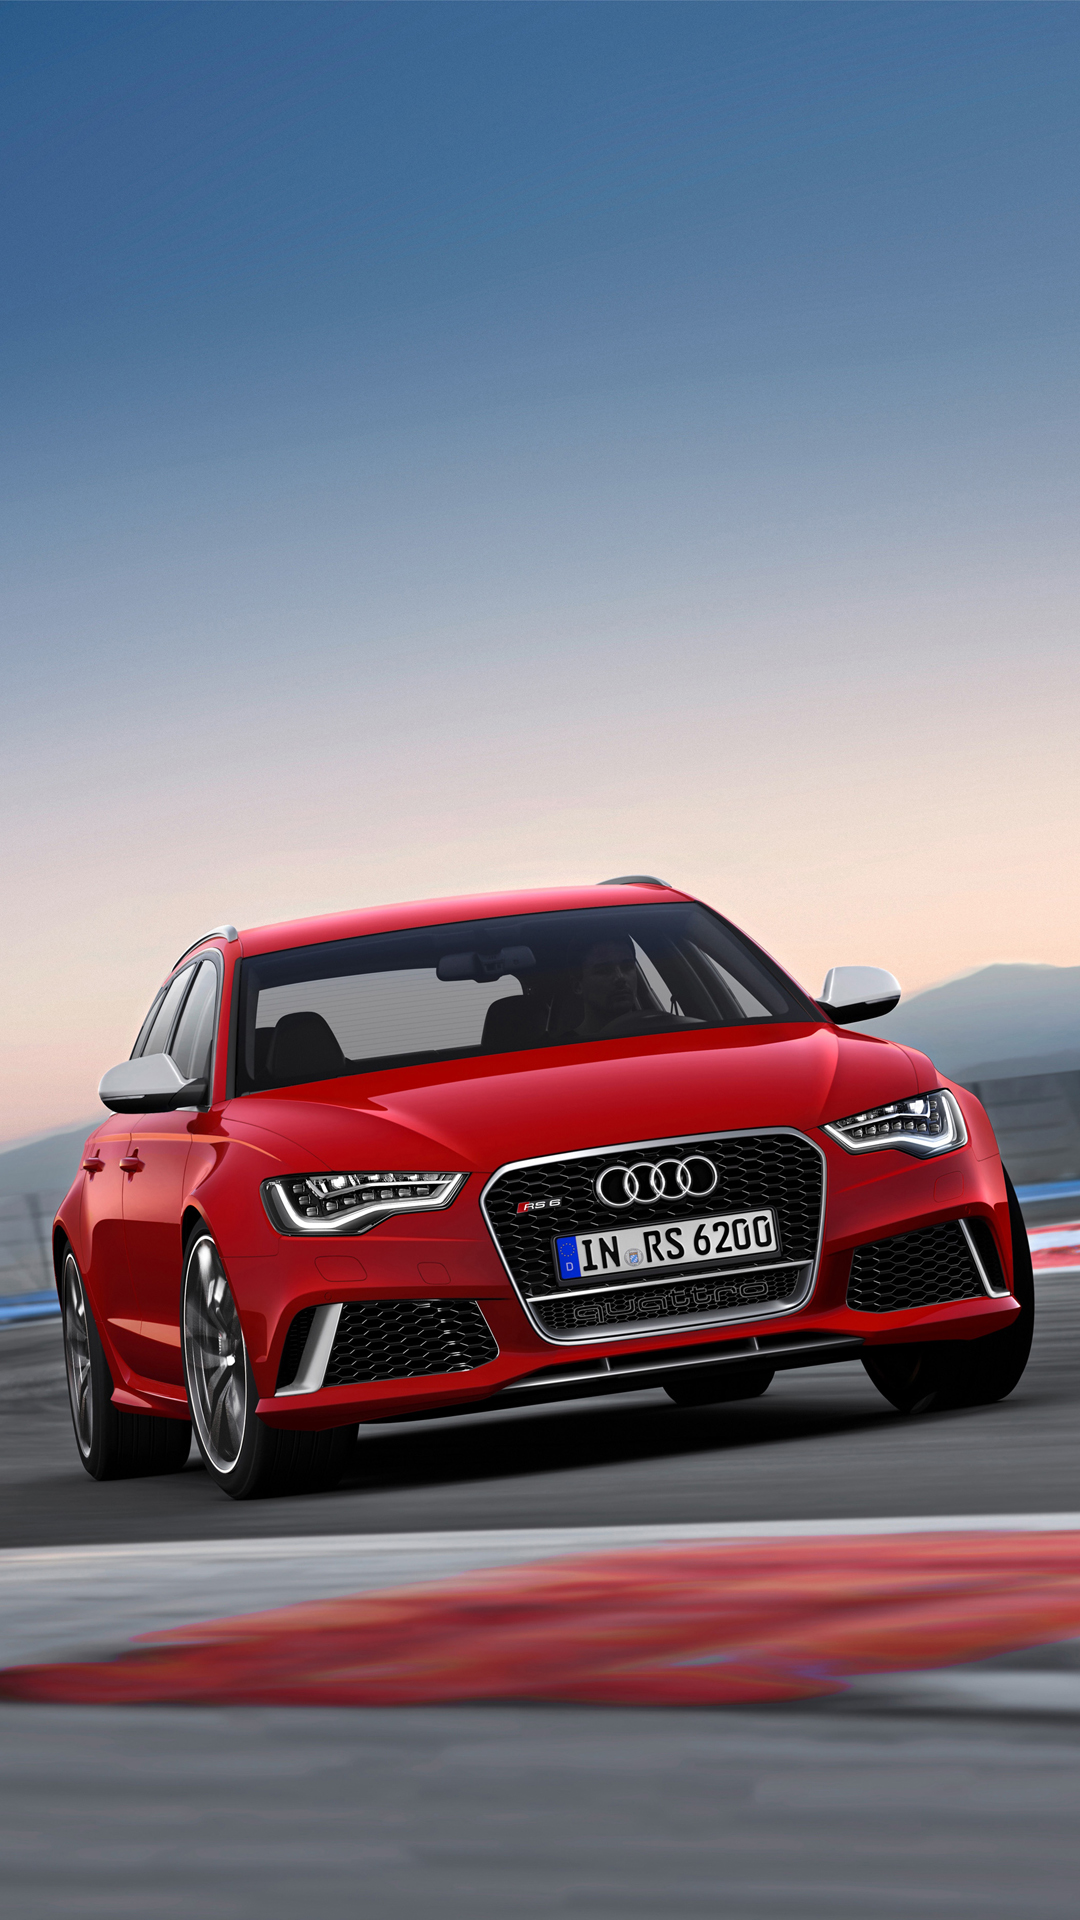 Audi Rs6 Htc One Wallpaper - Audi Rs6 , HD Wallpaper & Backgrounds